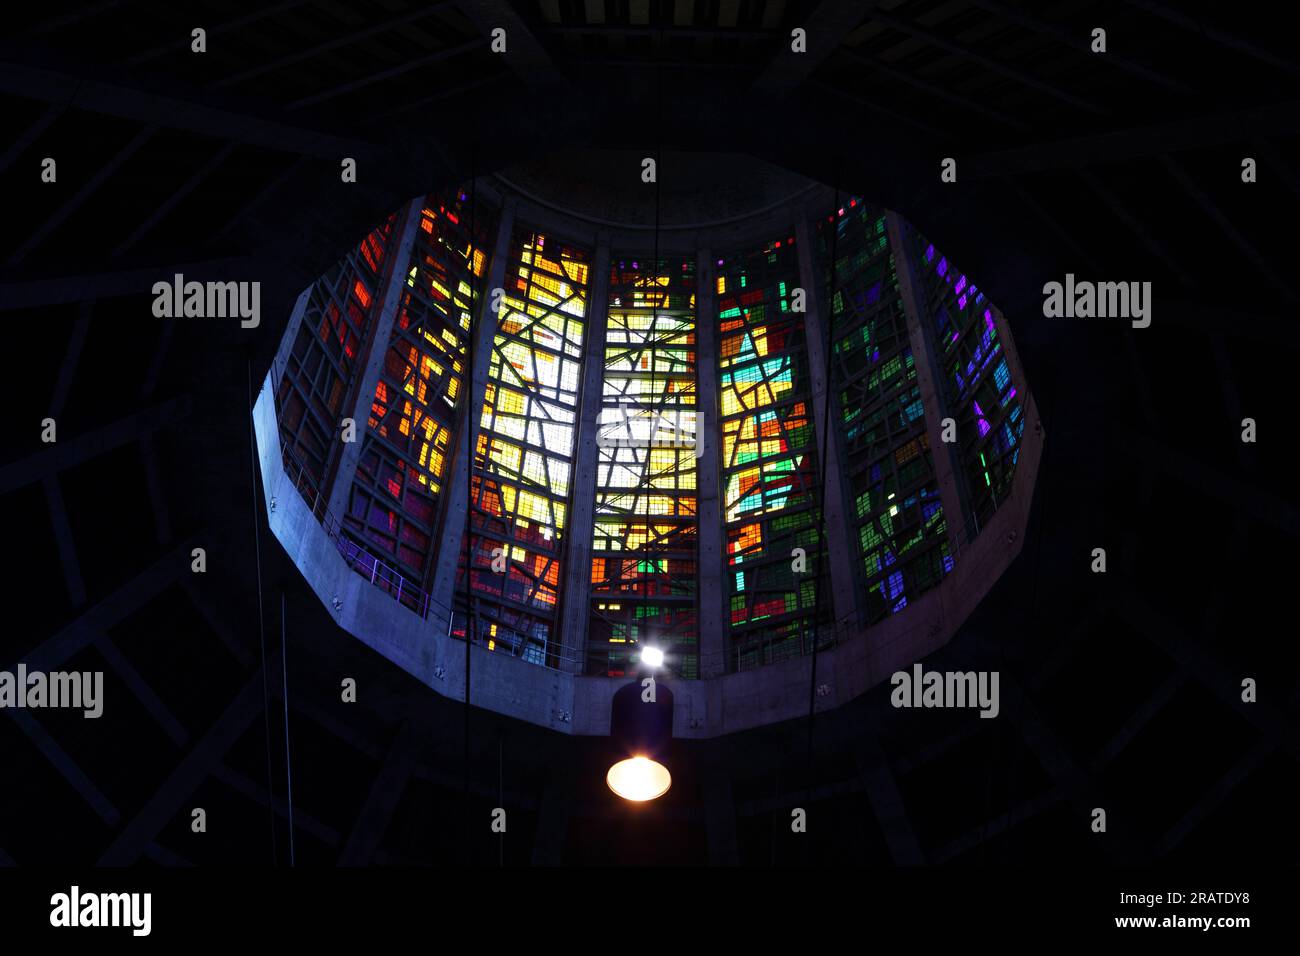 Liverpool Metropolitan Cathedral's interior, stained glass and circular nave. Stock Photo